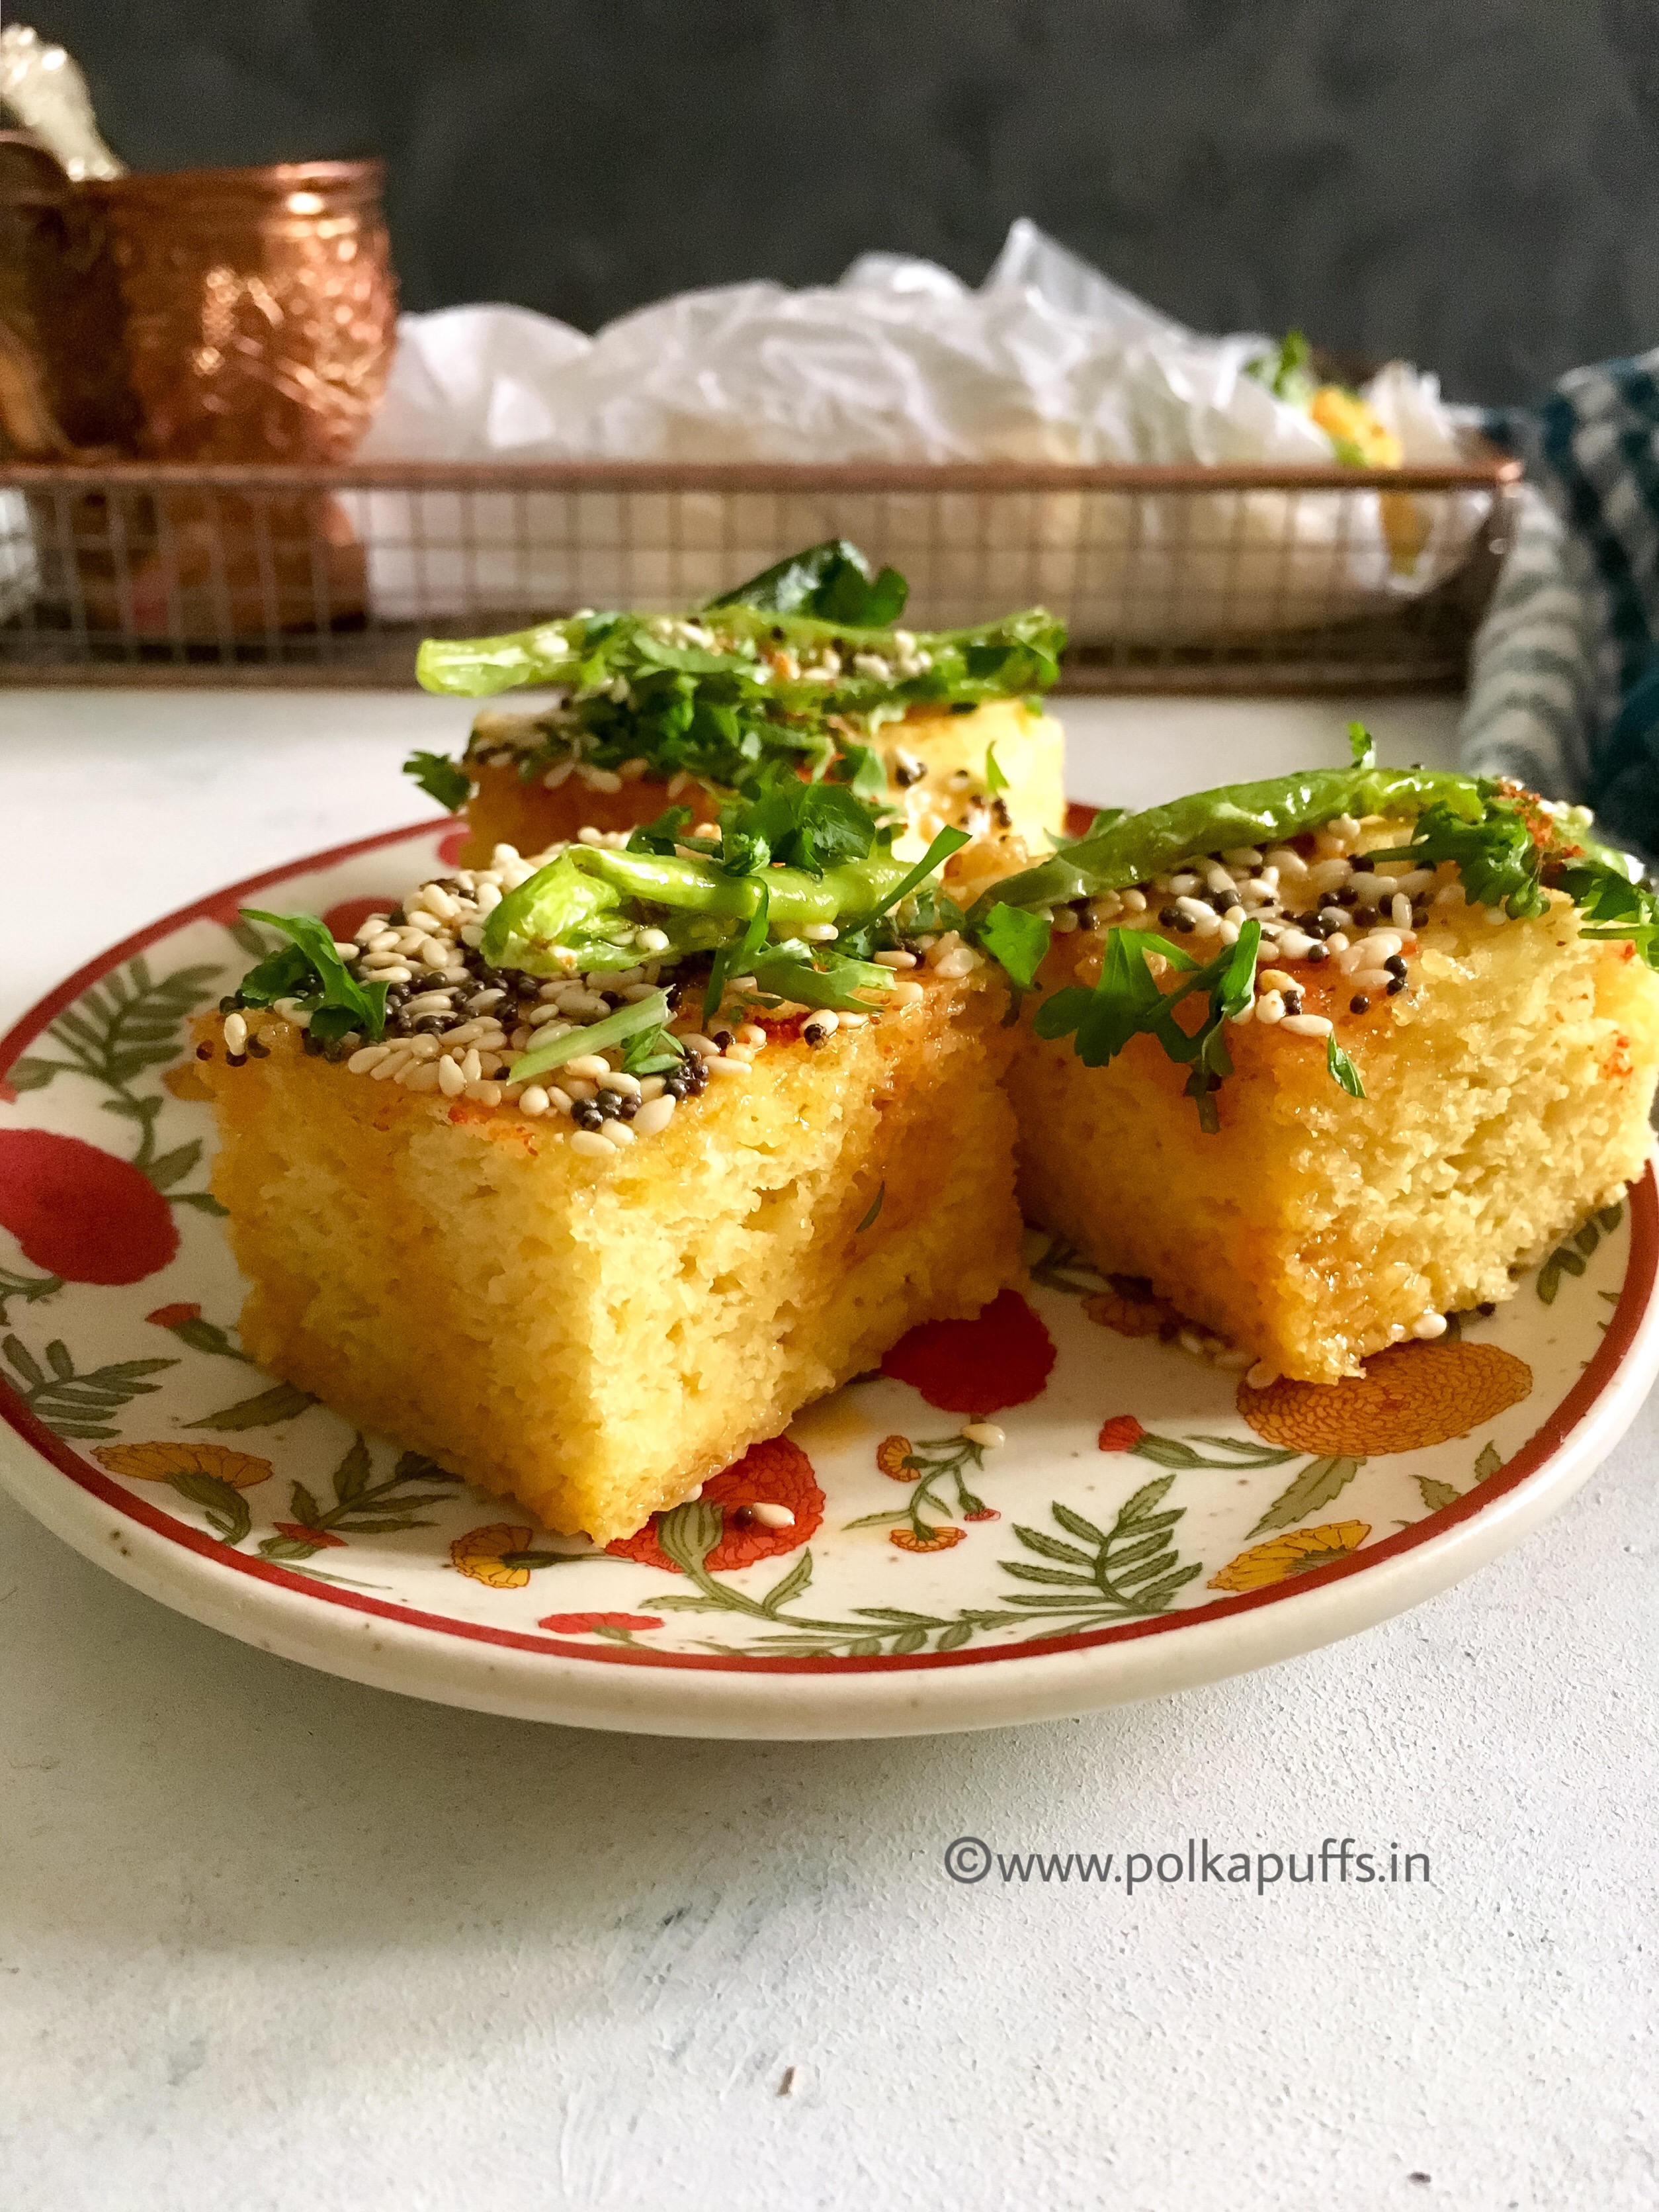 Steamed Khaman Dhokla Indian Savory Cake Recipe - Cooking The Globe